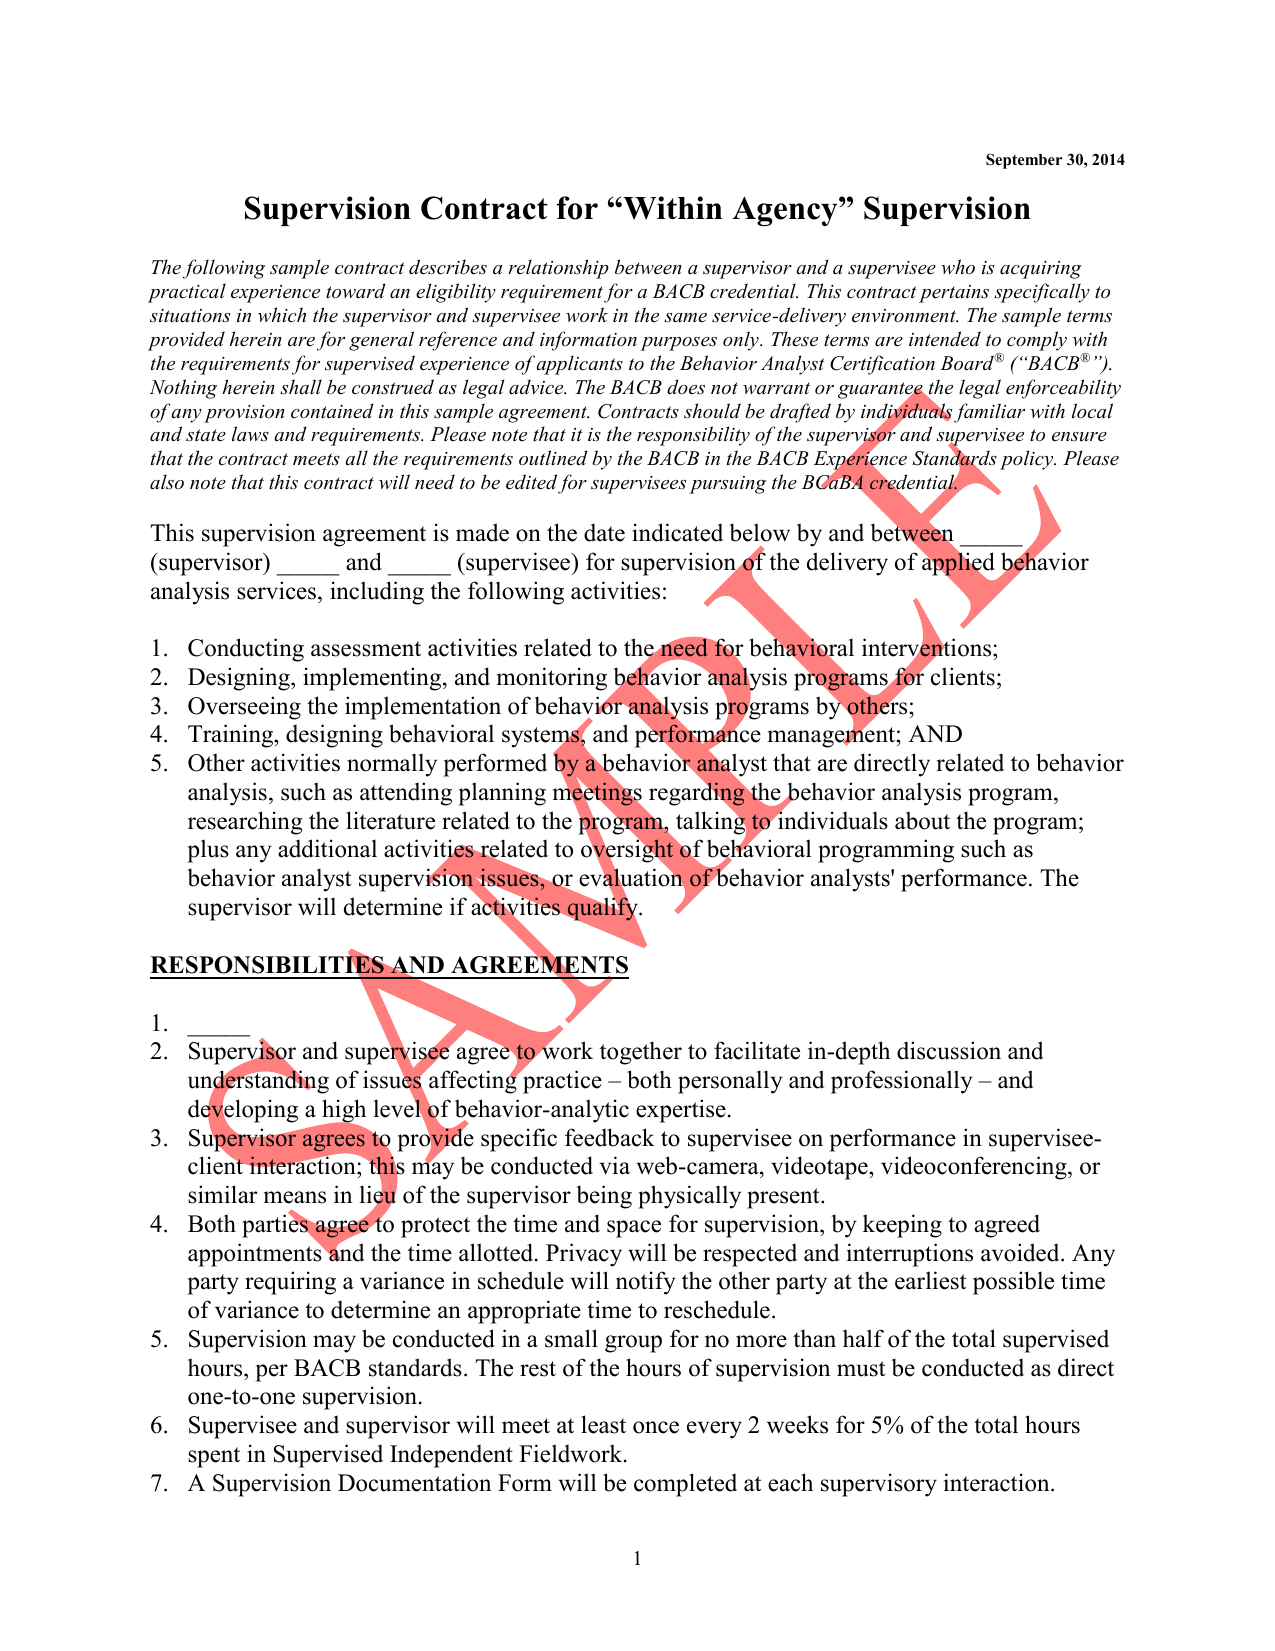 Bacb Supervision Contract Template